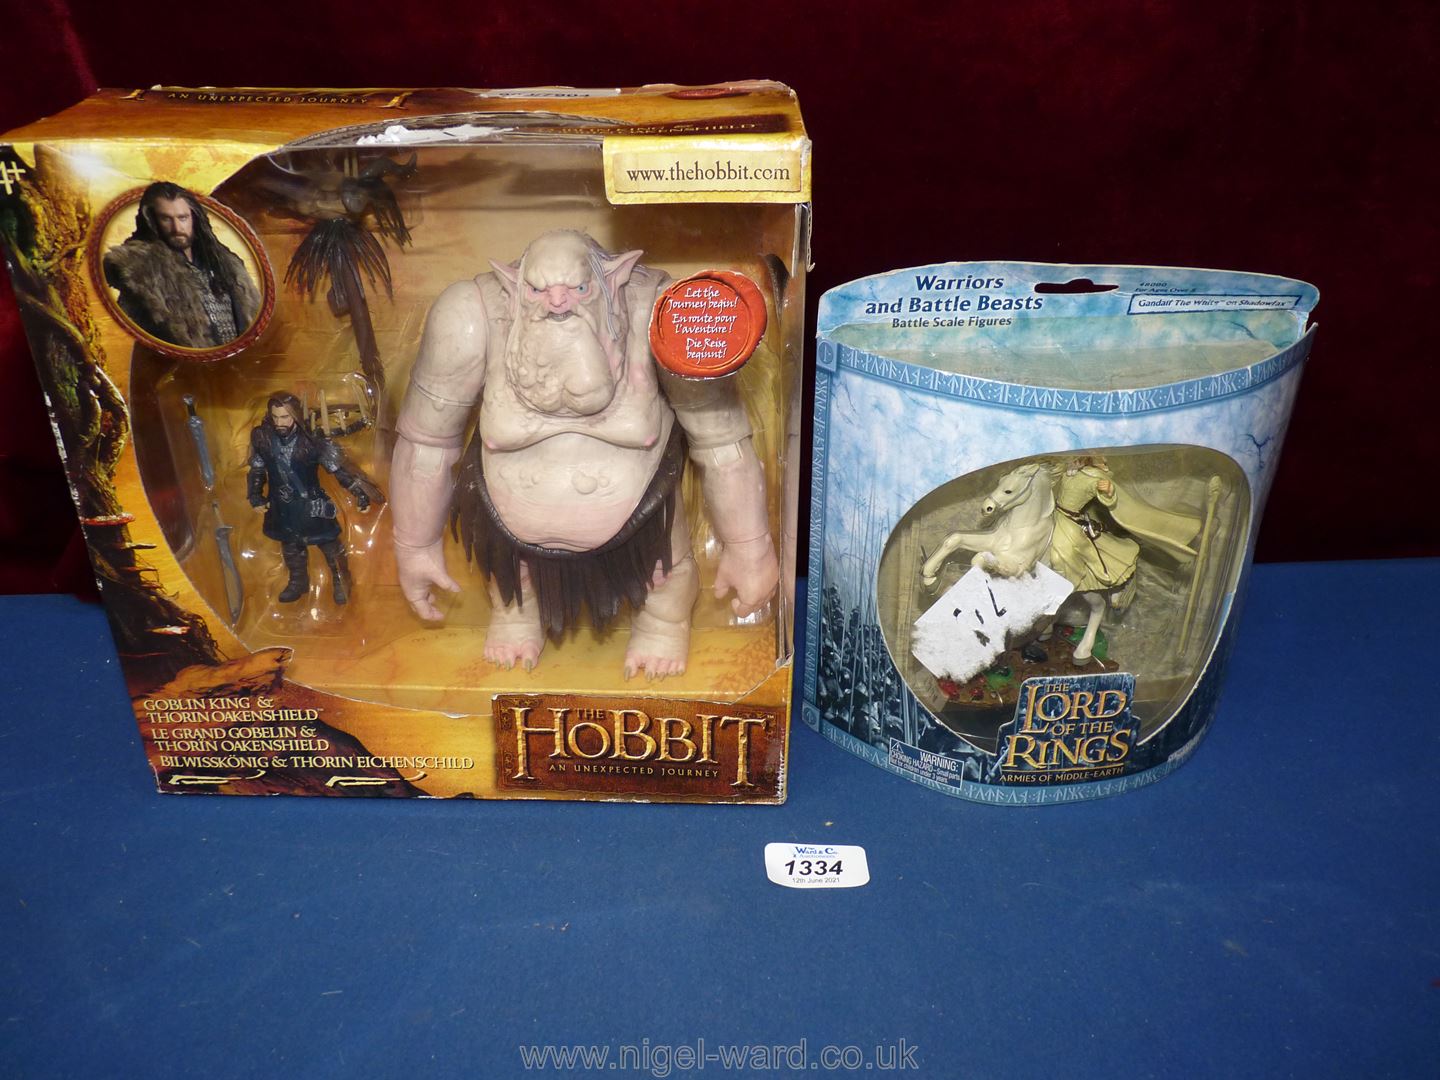 Three boxed figures from Lord of the Rings: Goblin King, Gandalf and Thorin Oakenshield.